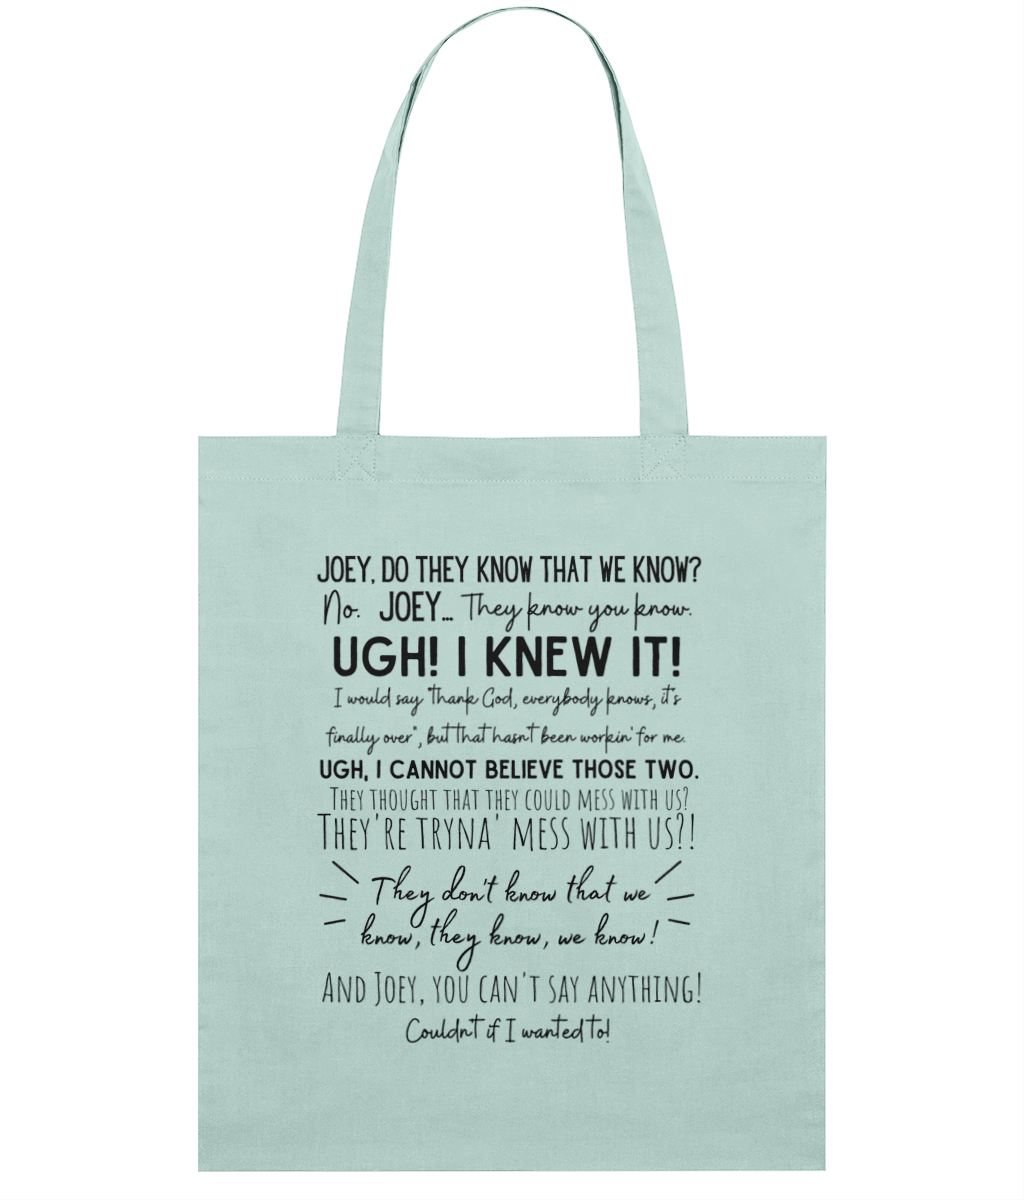 They Don't Know That We Know They Know Tote Bag